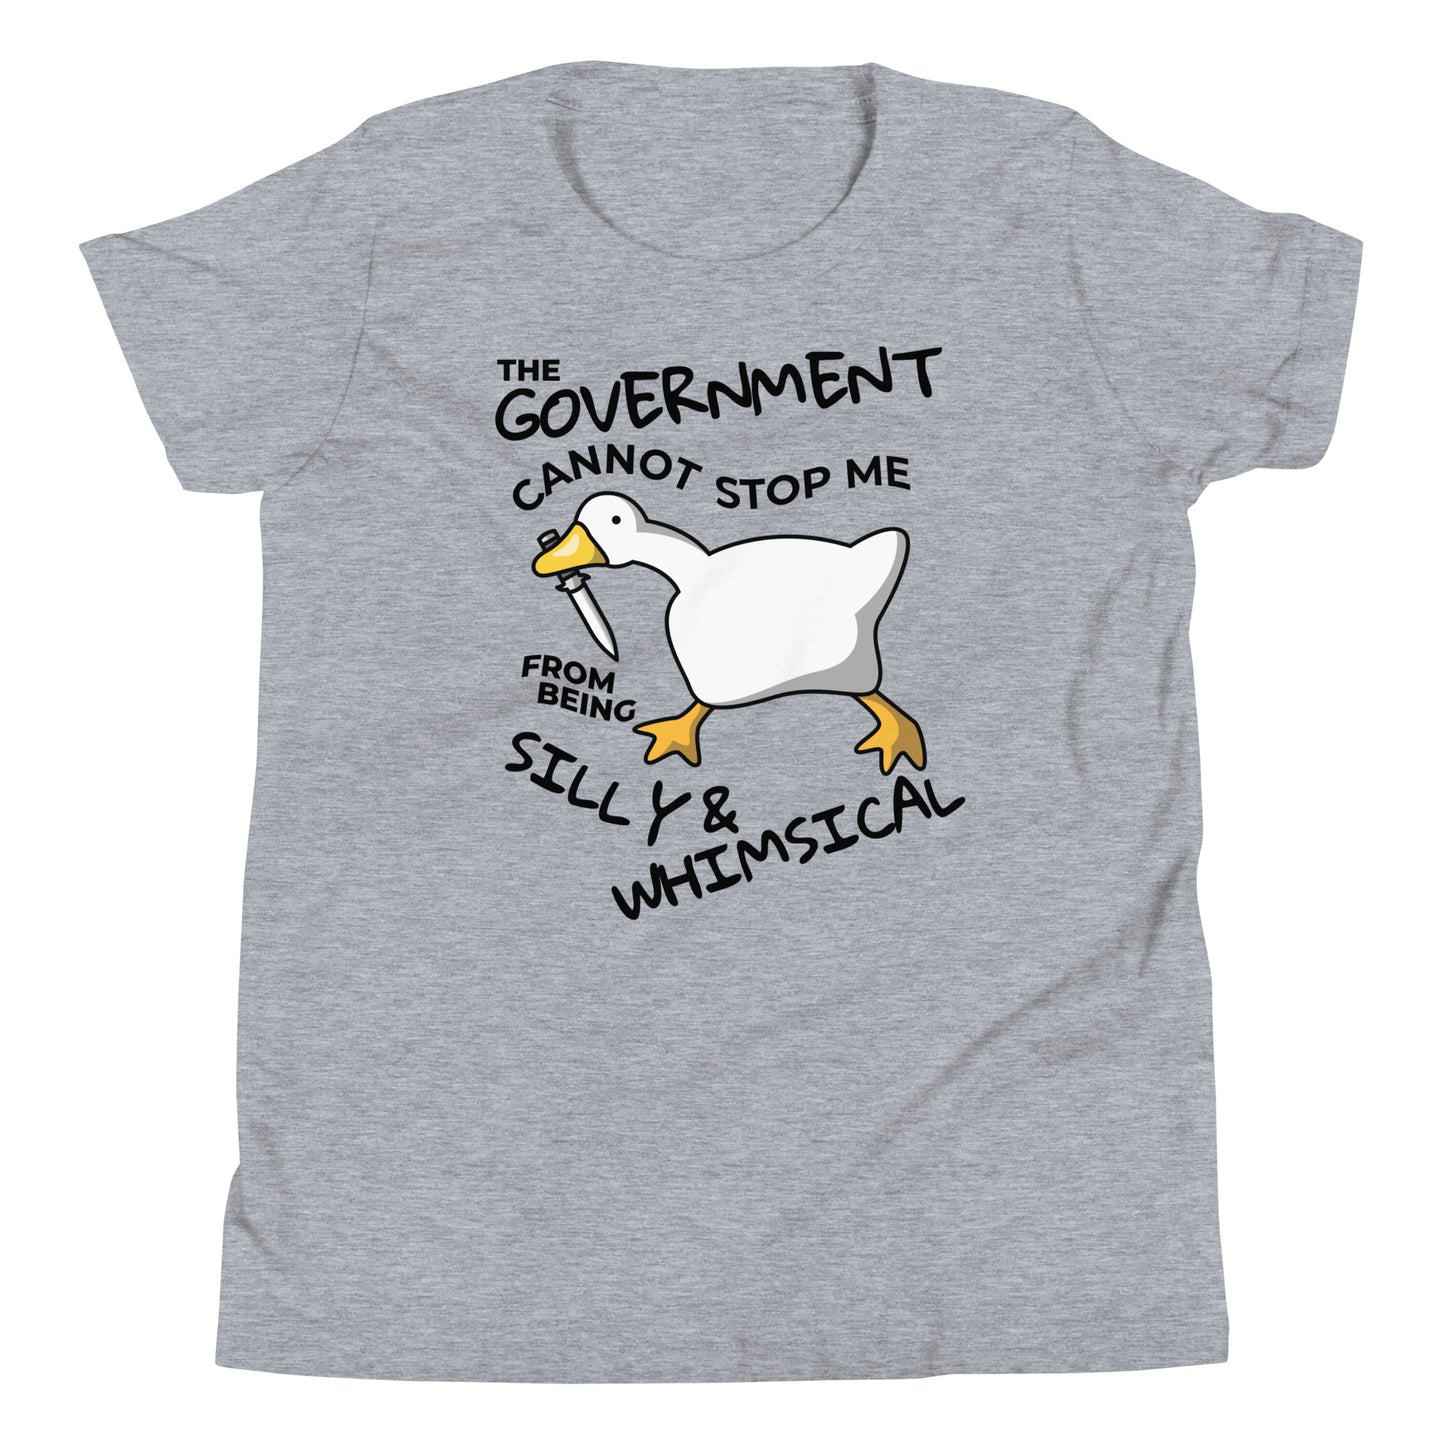 Youth The Government Cannot Stop Me From Being Silly & Whimsical T-Shirt